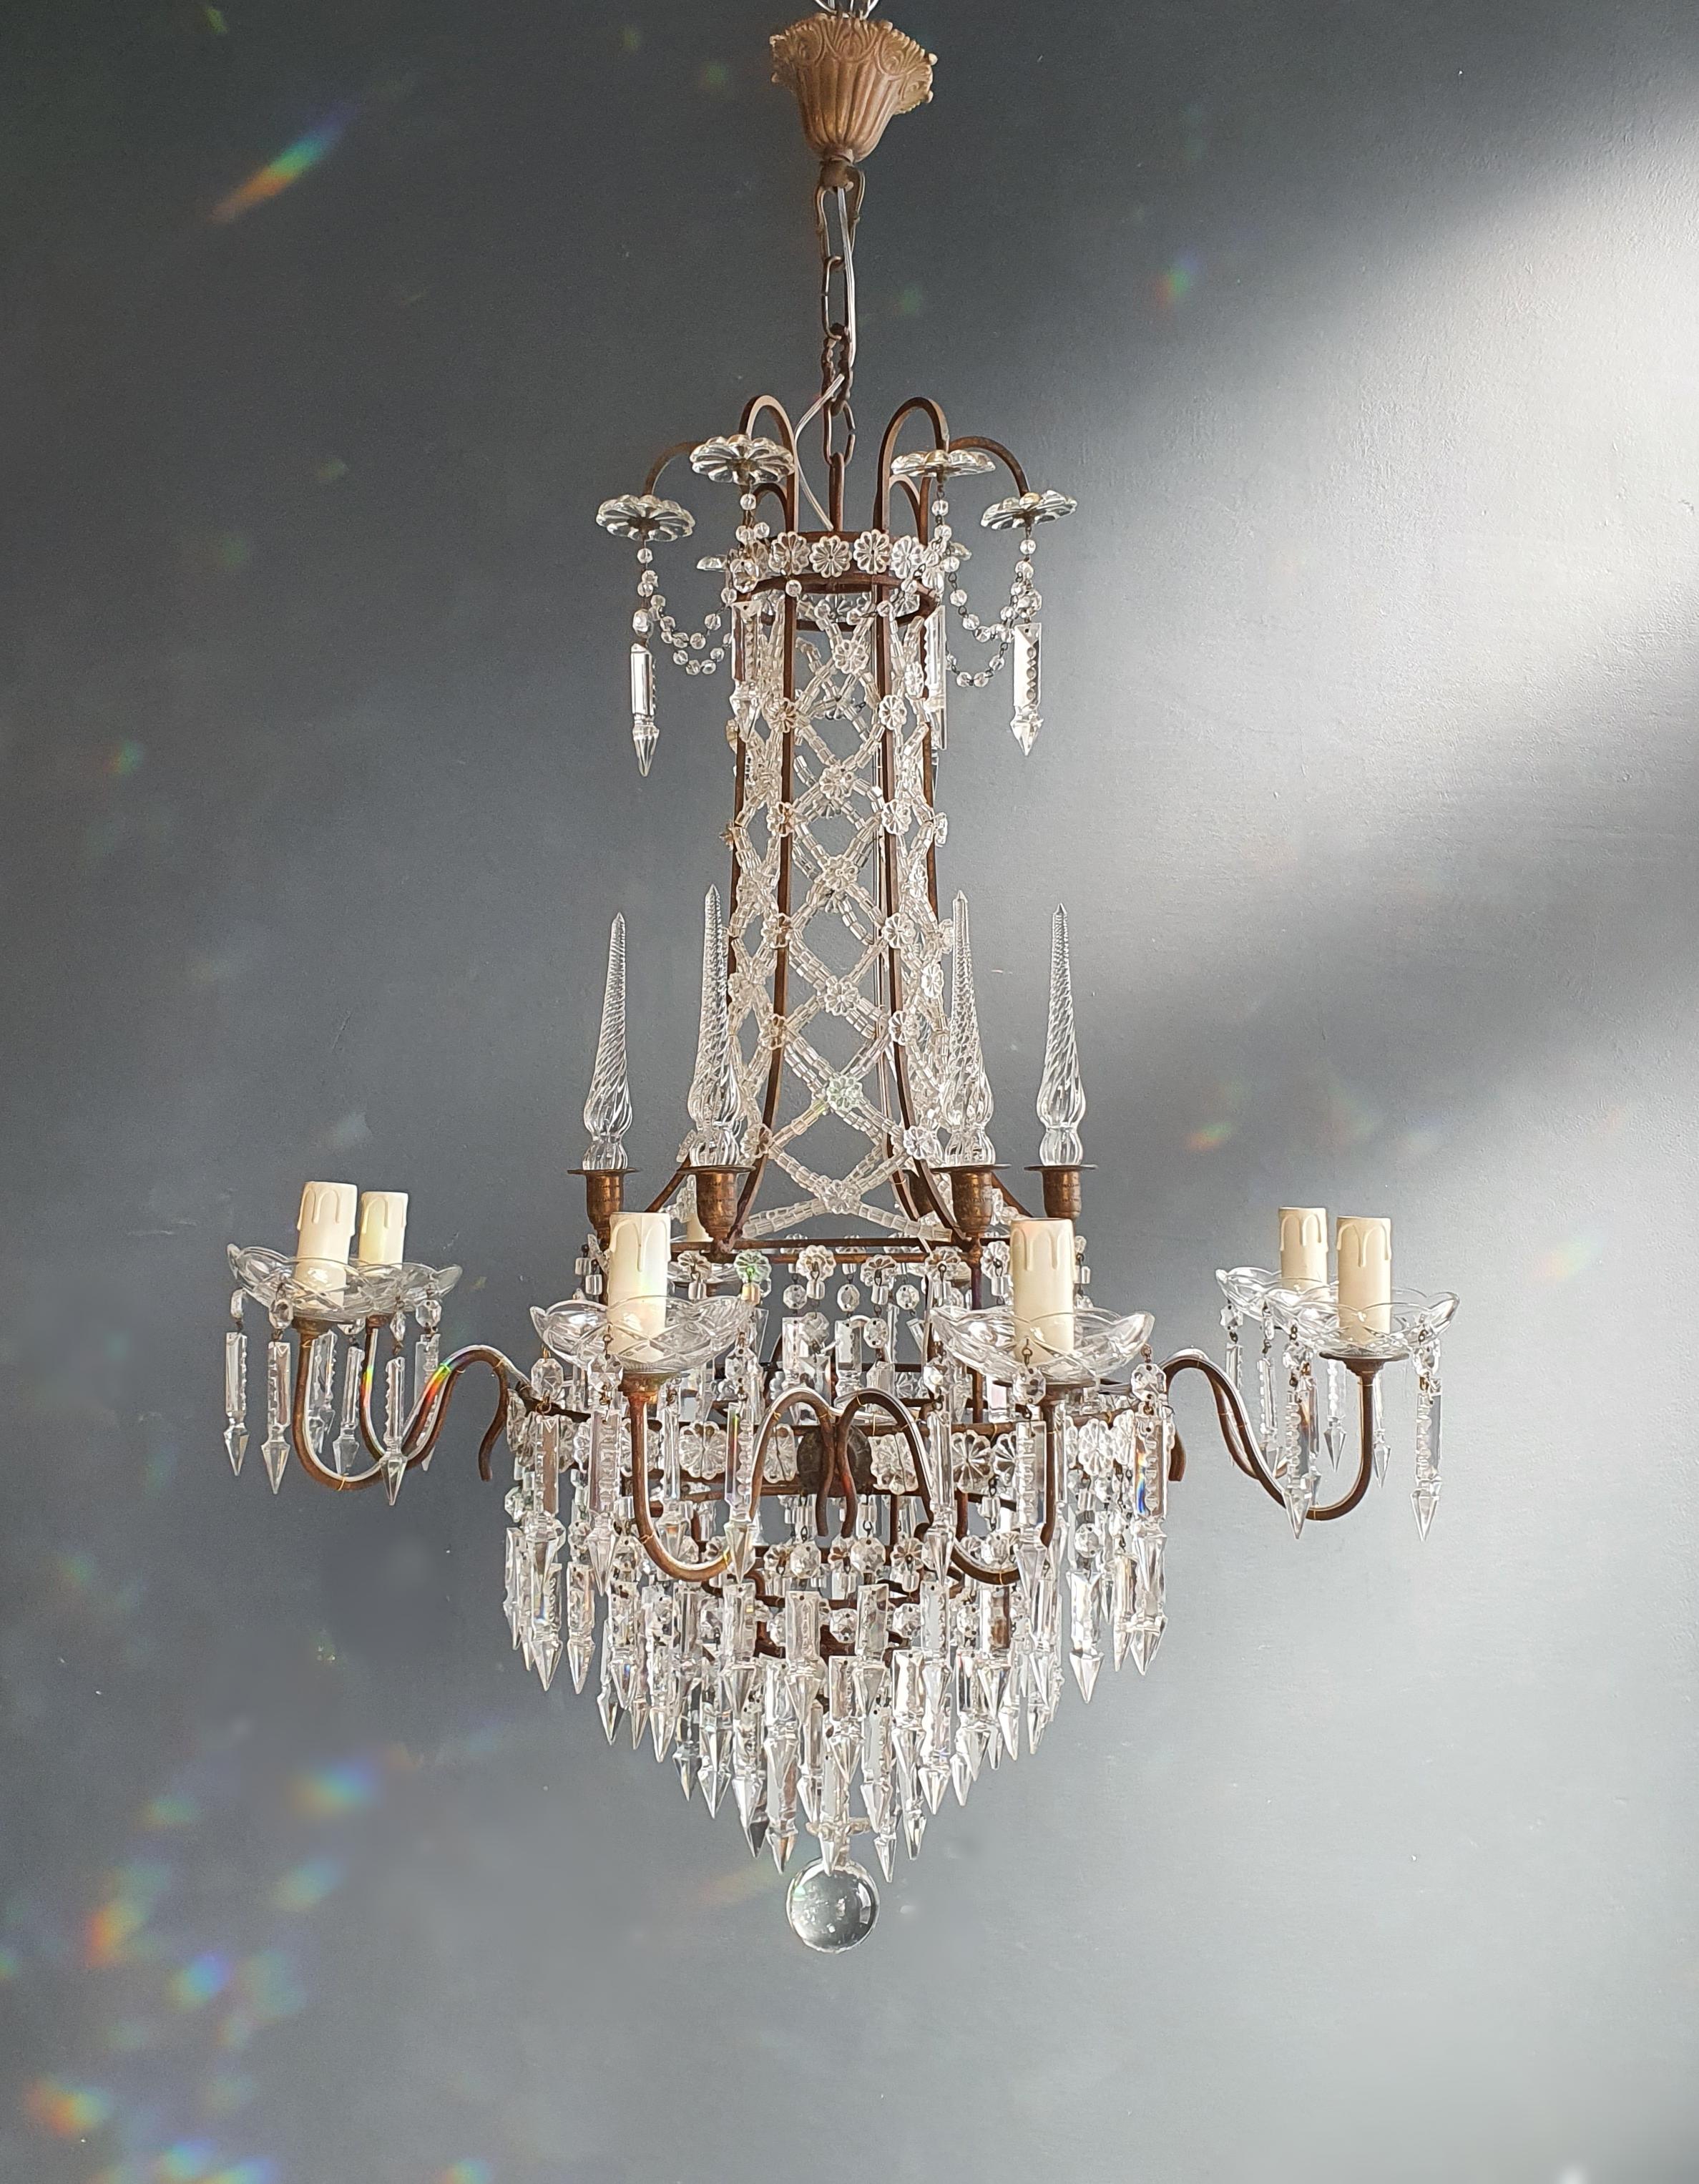 old chandelier with love and professionally restored in Berlin. electrical wiring works in the US. Re-wired and ready to hang. not one missing. Cabling completely renewed. Crystal, hand-knotted.

Measure: Total height 110 cm, height without chain 85